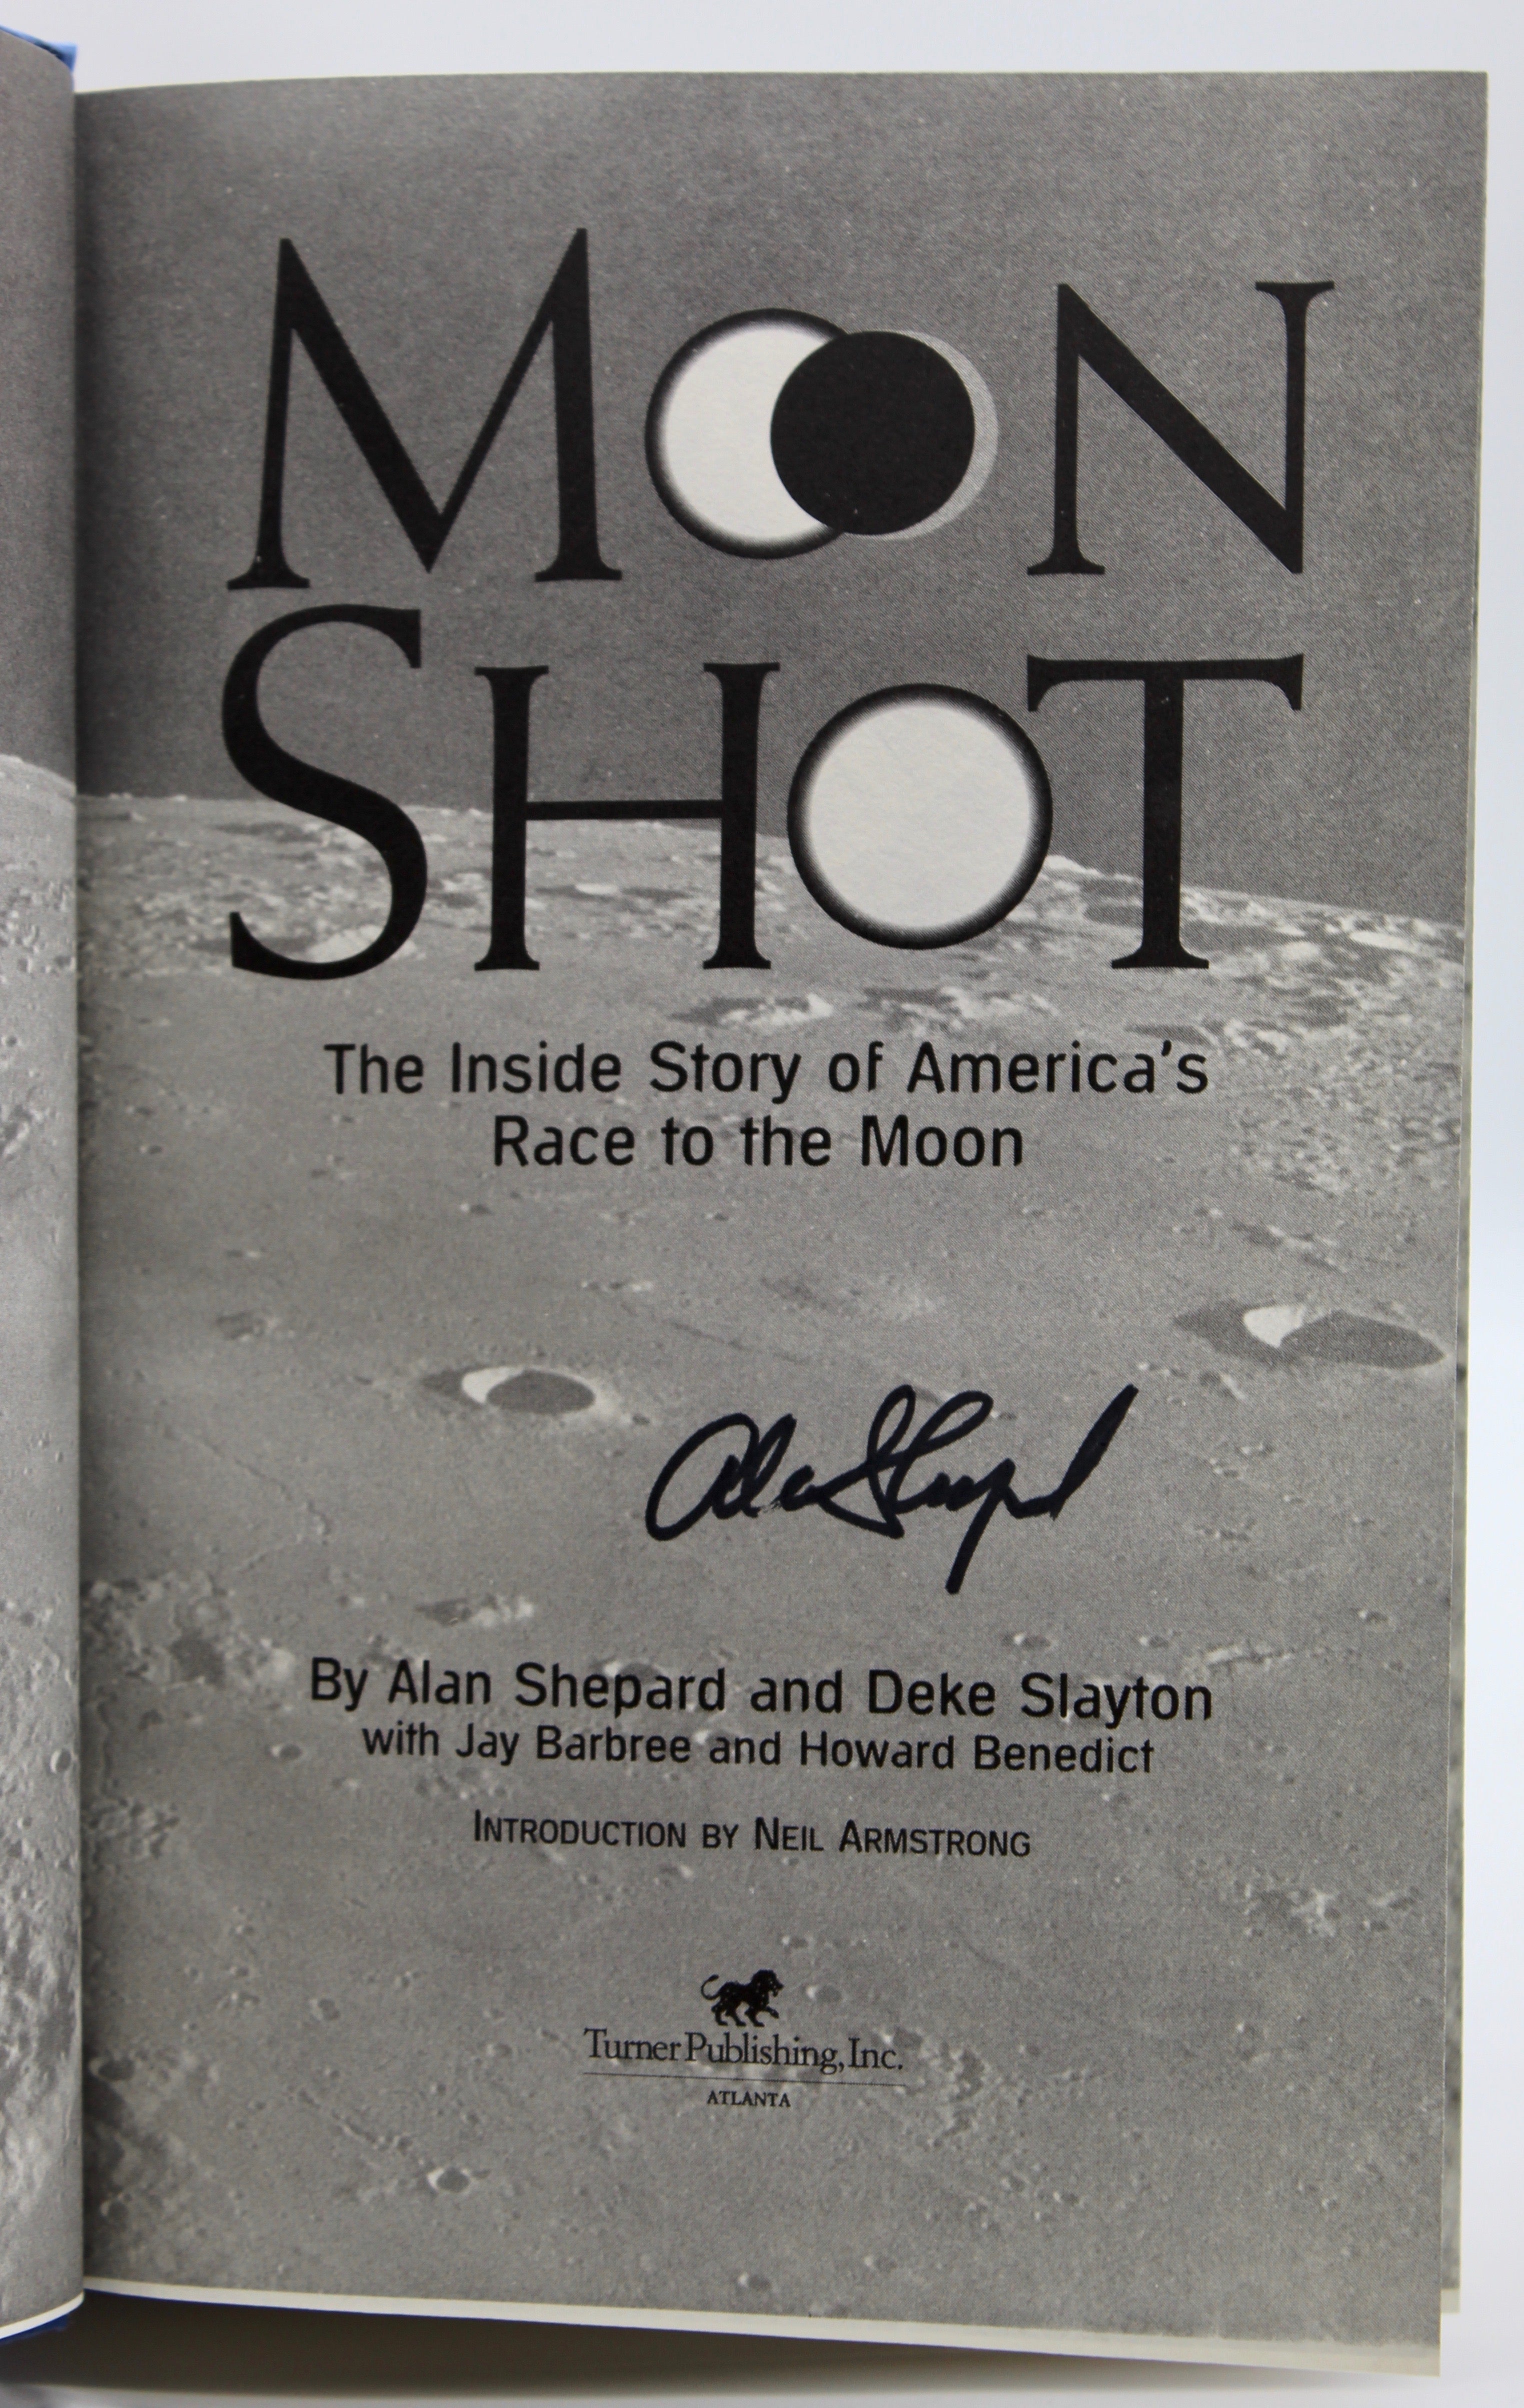 Moon Shot: The Inside Story of America's Race to the Moon, By Alan Shepard and Deke Slayton, Signed by Alan Shepard, First Edition, 1994